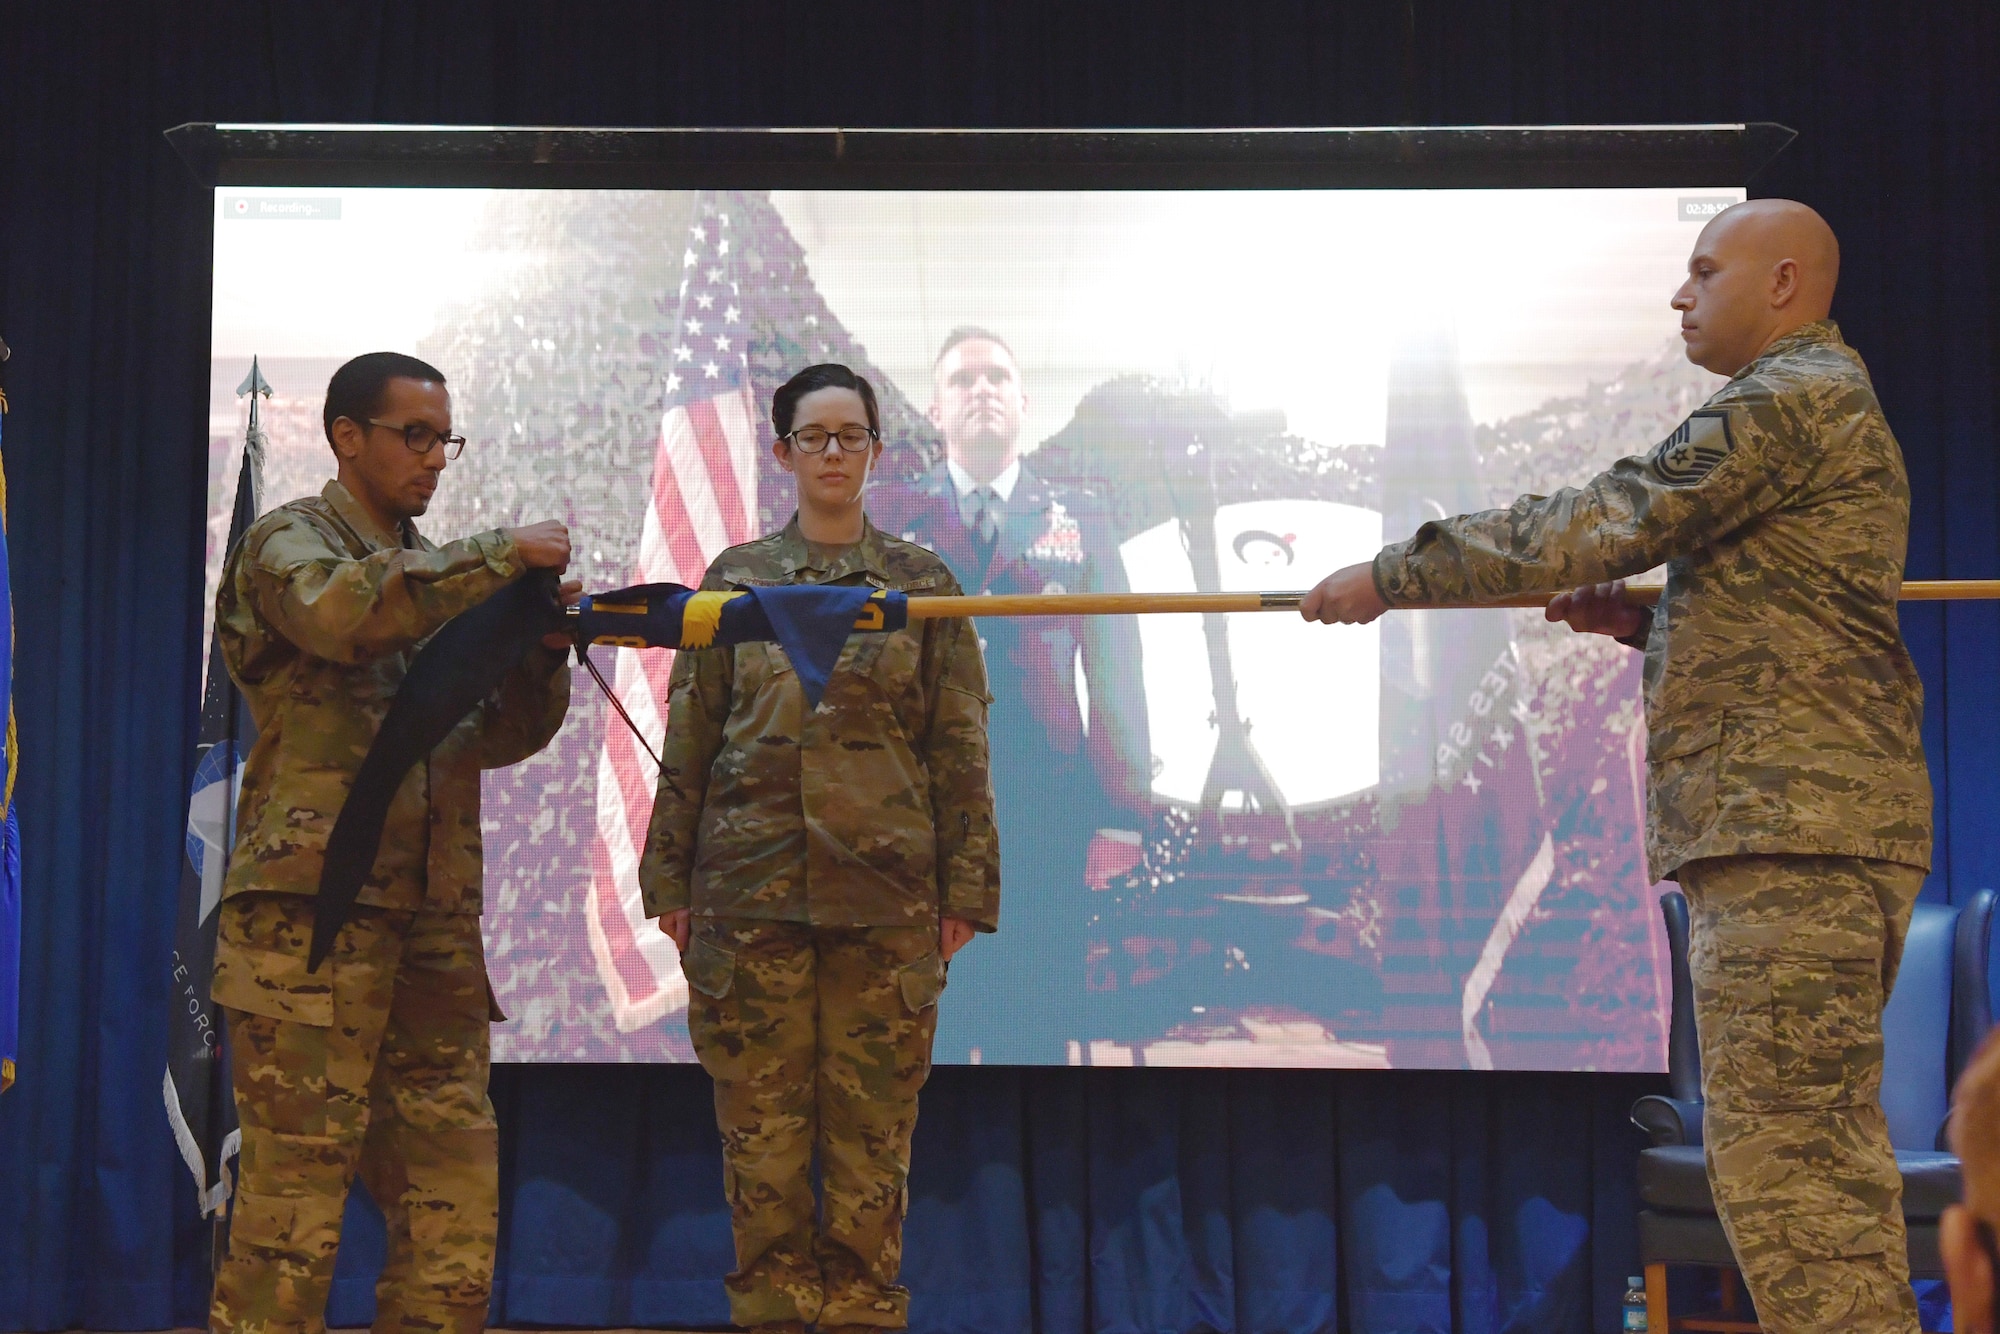 The 18th Intelligence Squadron Detachment 2 guidon furls during a transition ceremony at Osan Air Base, Republic of Korea, Nov. 5, 2020. The 18th IS rendered inactive as the unit transitioned into the U.S. Space Force’s 73rd ISRS. (U.S. Air Force photo by Senior Airman Noah Sudolcan)